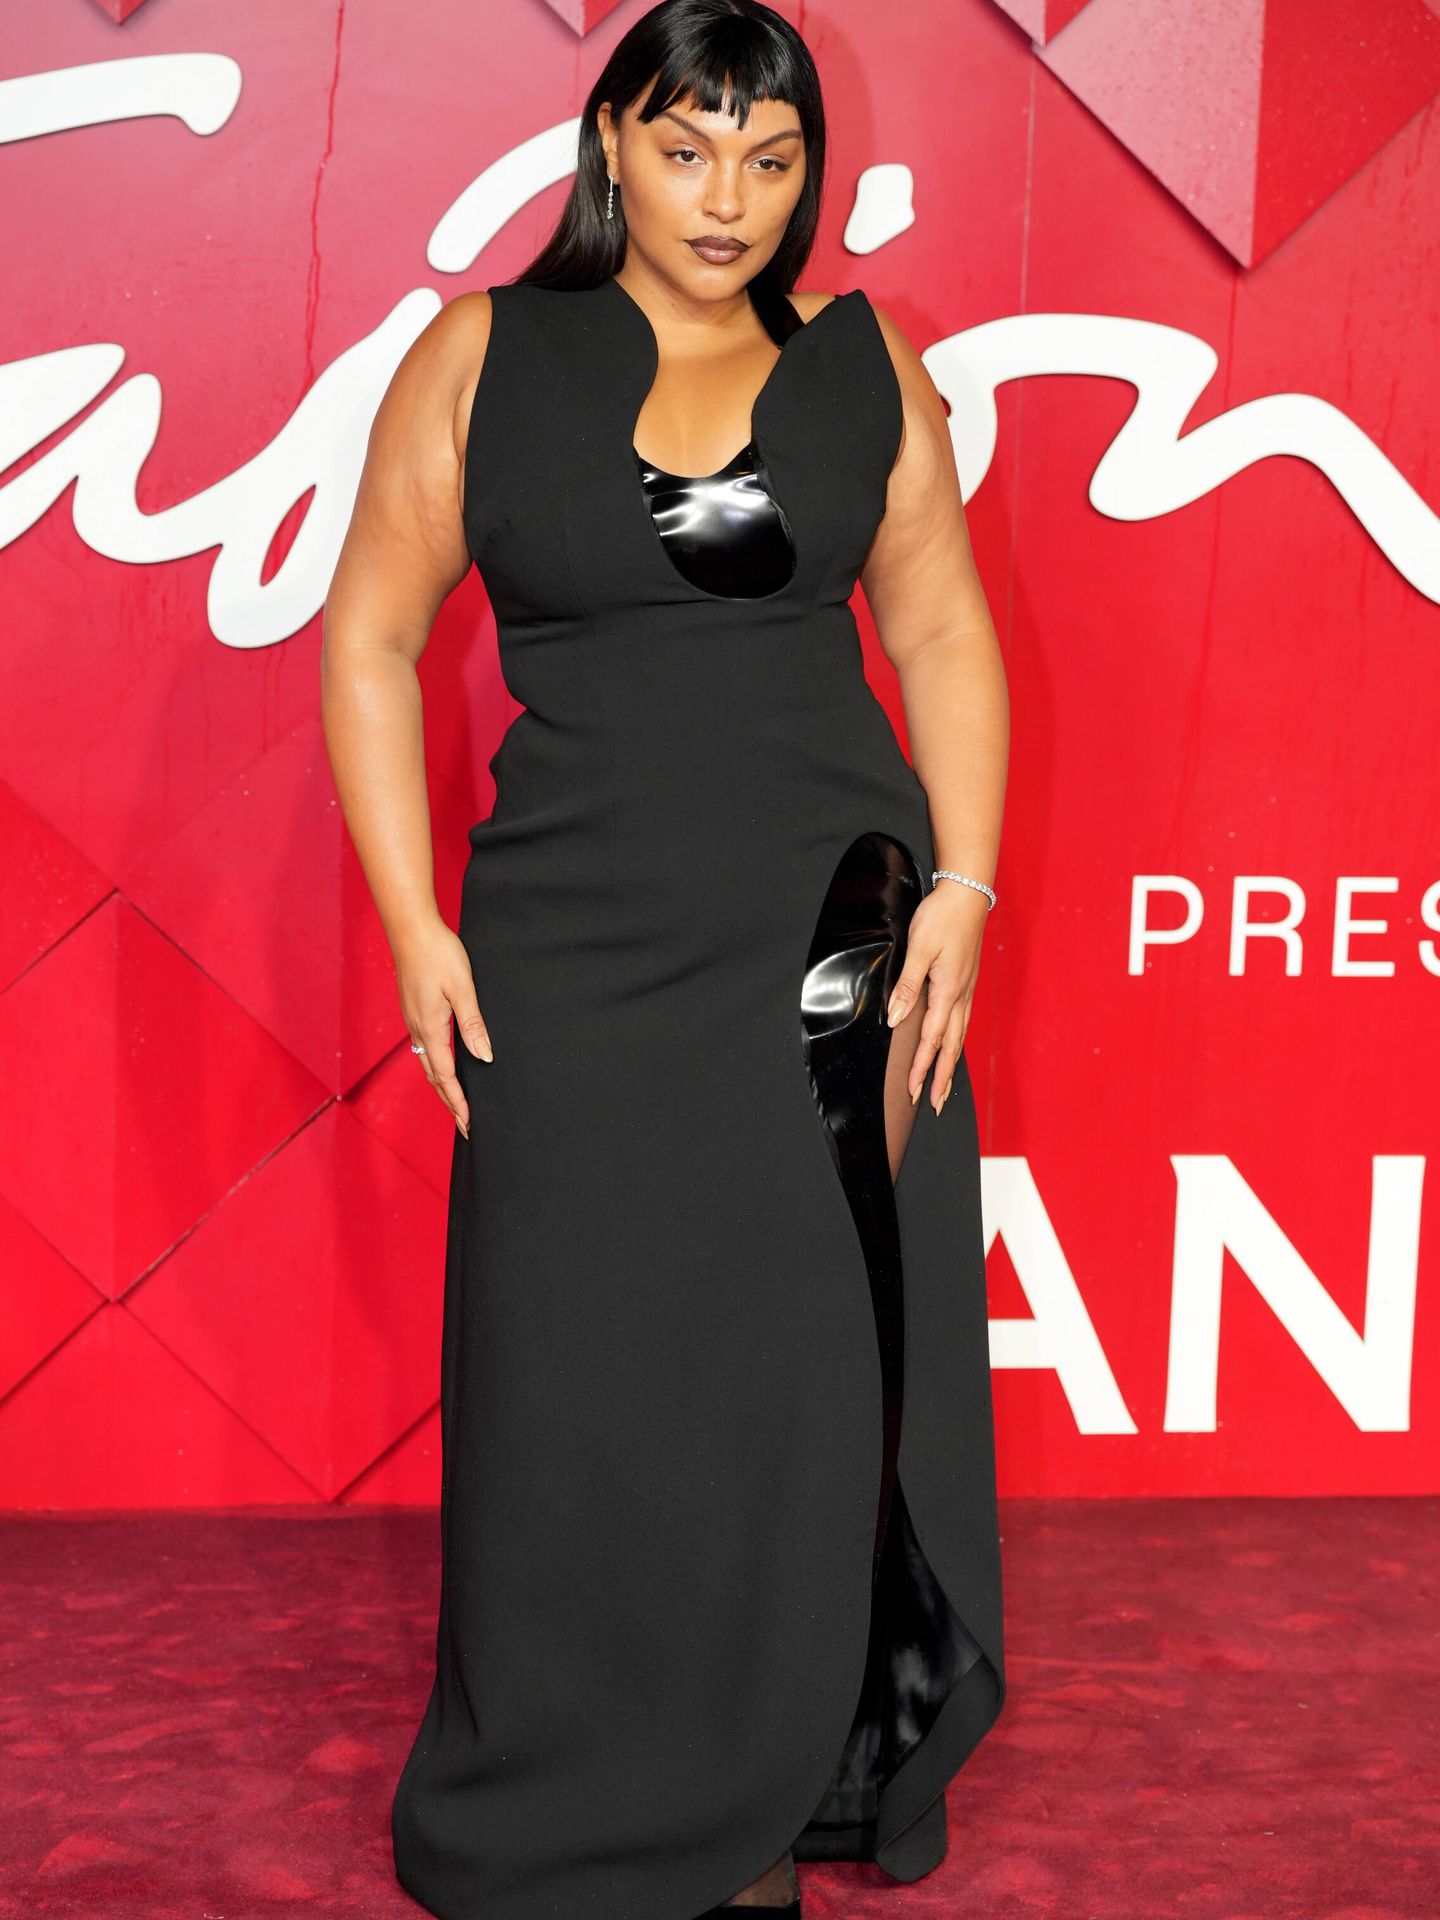  Paloma Elsesser. (Getty Images)